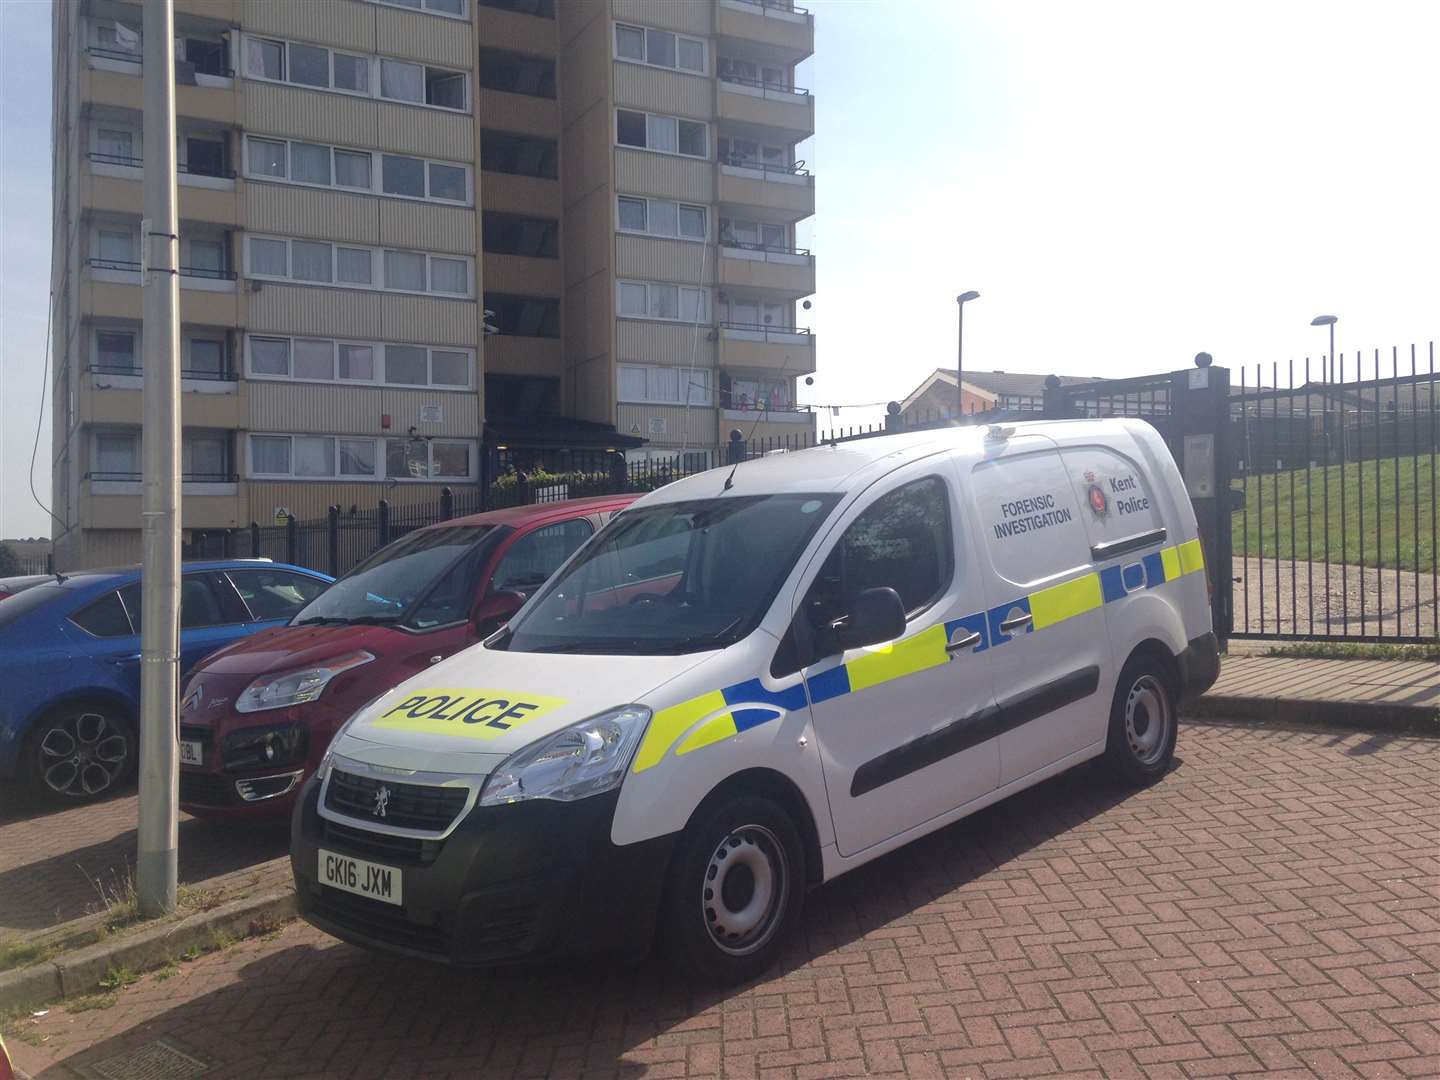 James O'Rourke was found dead in the stairwell of the flats in Shipwrights Avenue